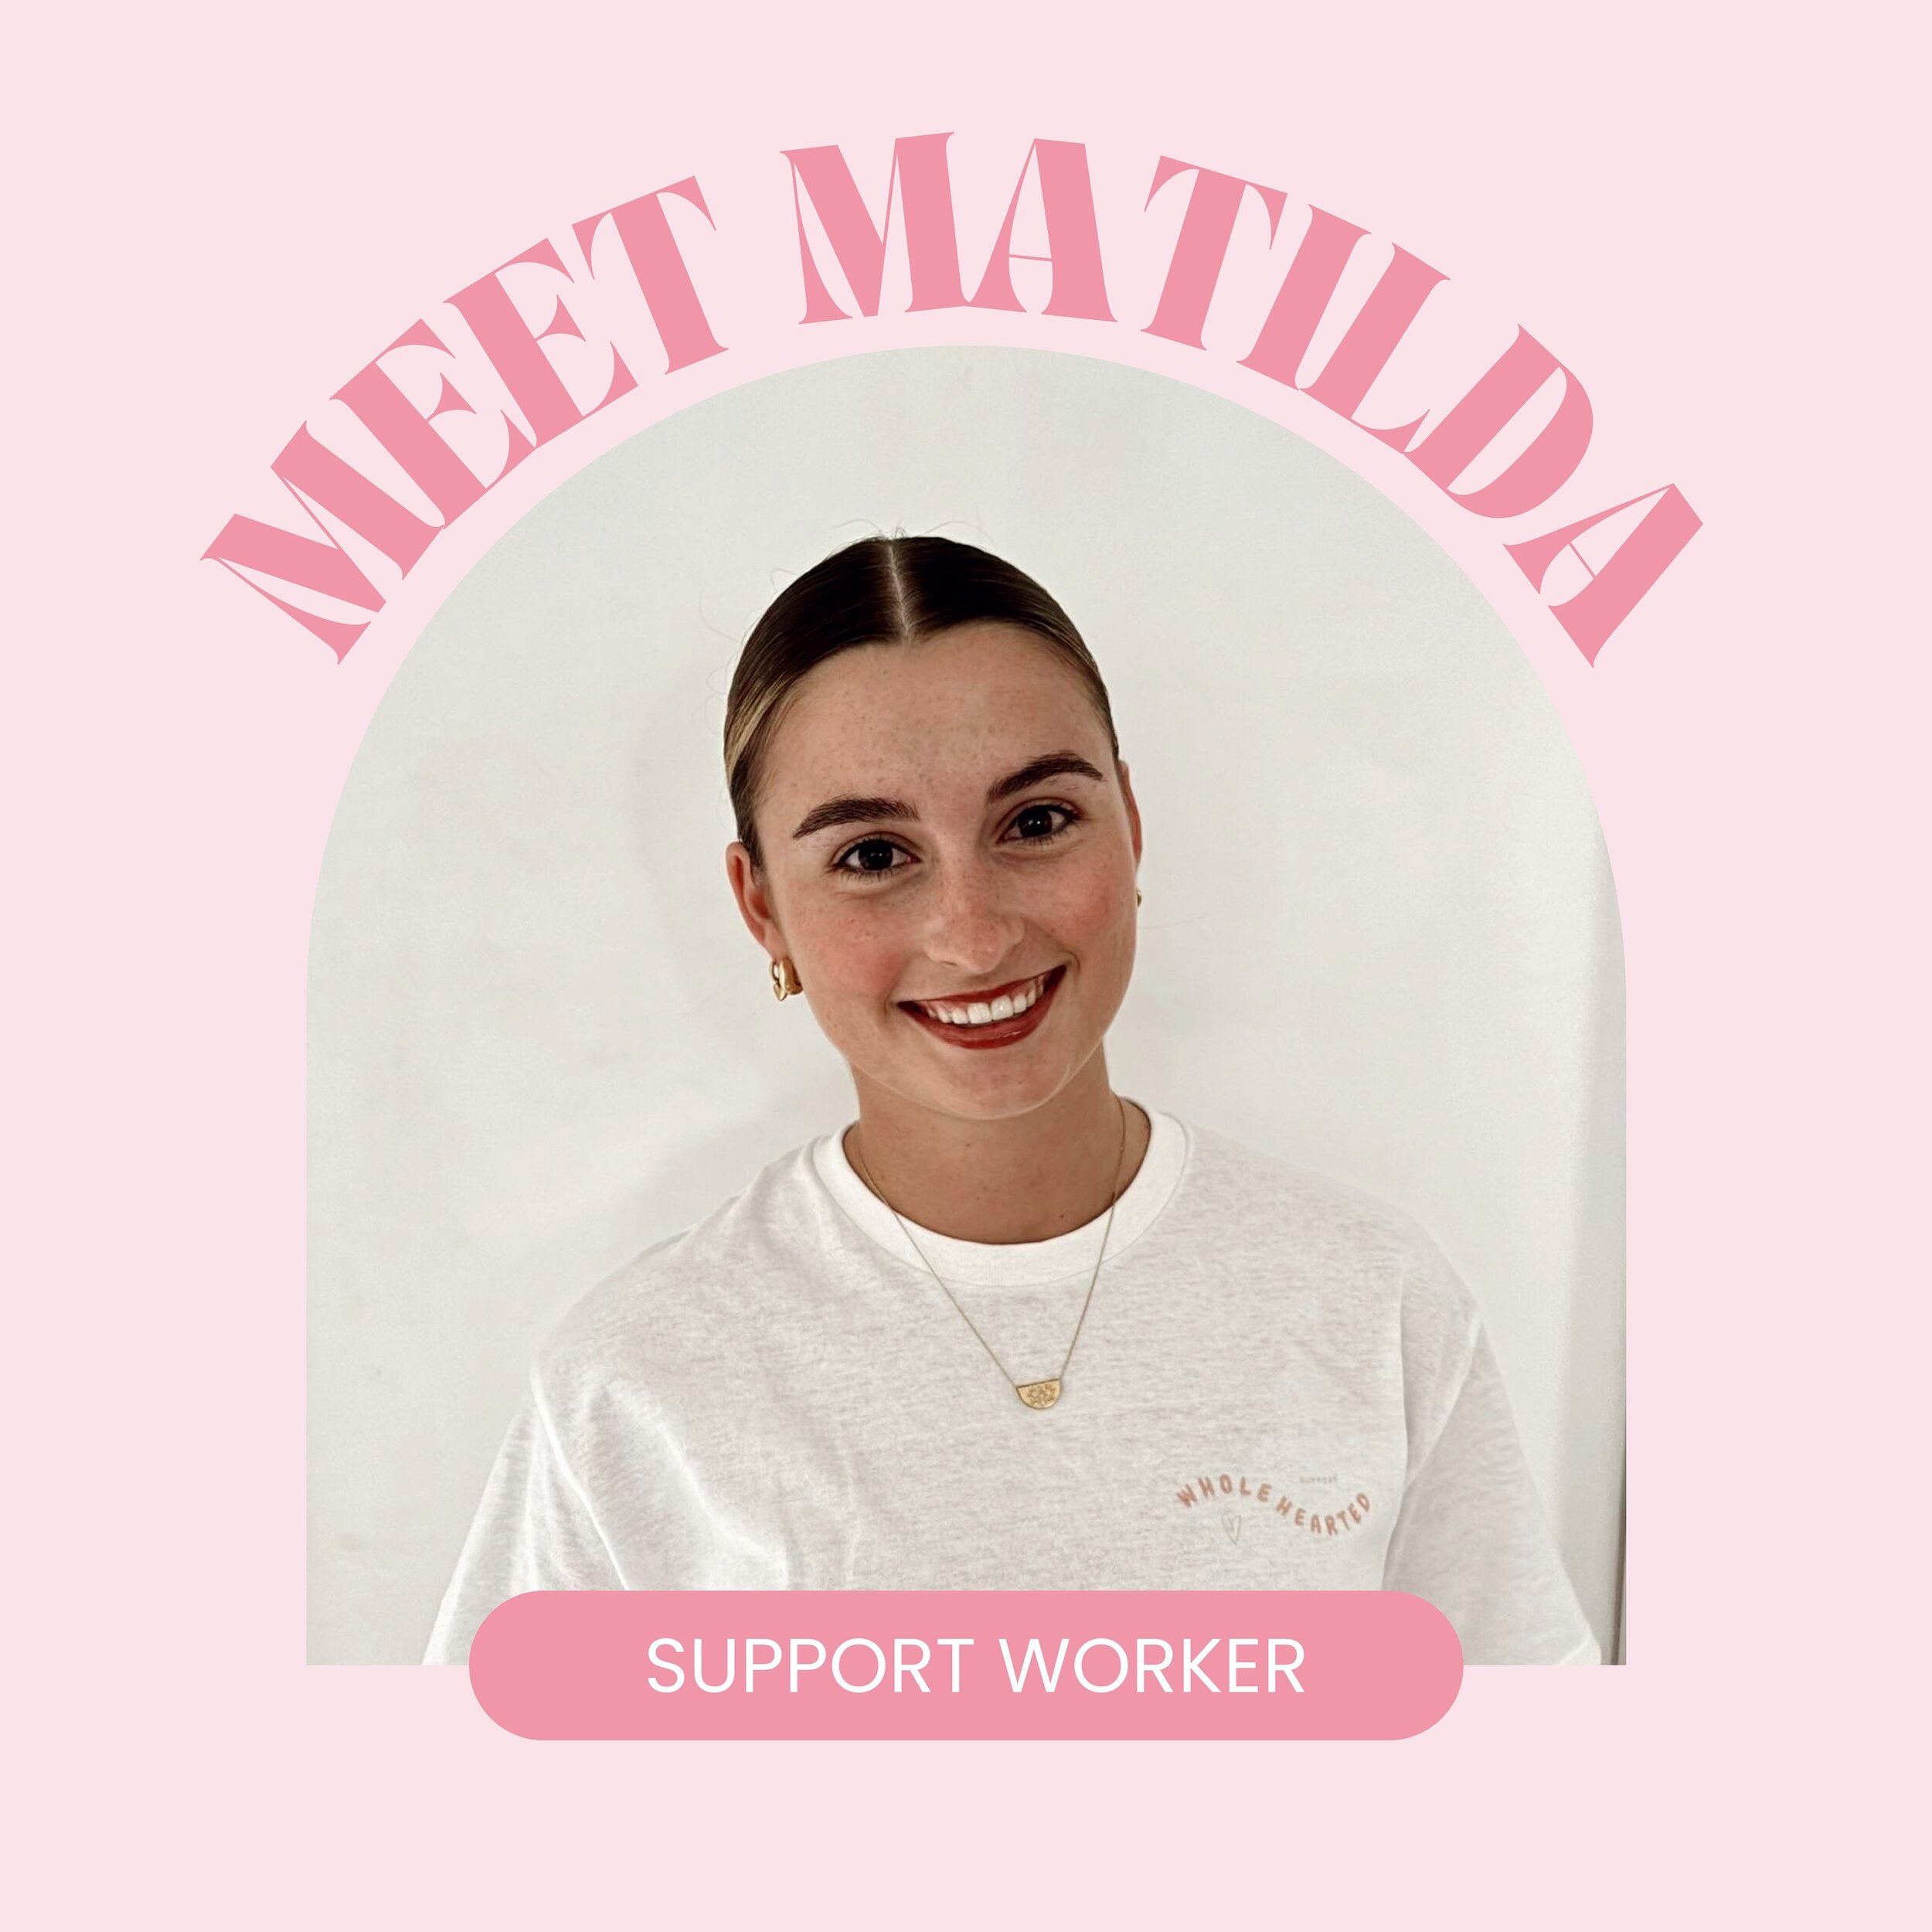 MEET MATILDA!🌸

Matilda is one of our Support Workers here at Wholehearted Support✨
Matilda is currently studying a Bachelor of Education (Primary) here at CQU Bundaberg👩🏻&zwj;🎓

&bull;

Let&rsquo;s get to know Matilda!

What is your dream travel